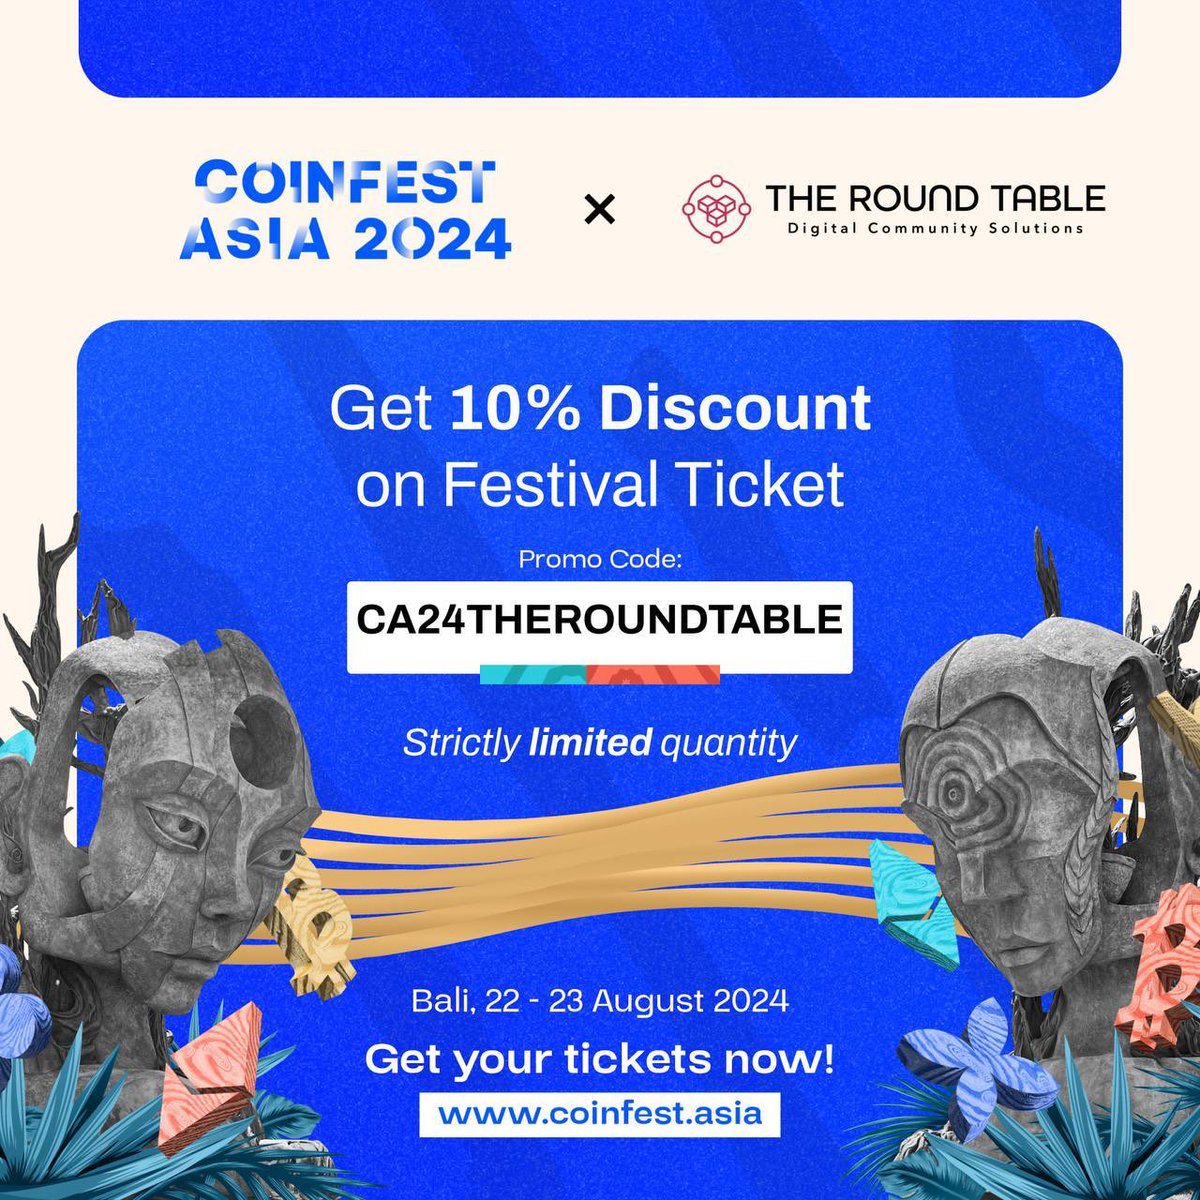 The Round Table - Digital Community Solutions is Coinfest Asia 2024's official community partner! 🤝

🎟 Get your tickets at coinfest.asia and use our special promo code : CA24THEROUNDTABLE to get 10% off!

#CommunityPartnerships
#CoinfestAsia2024
#TheRoundTable